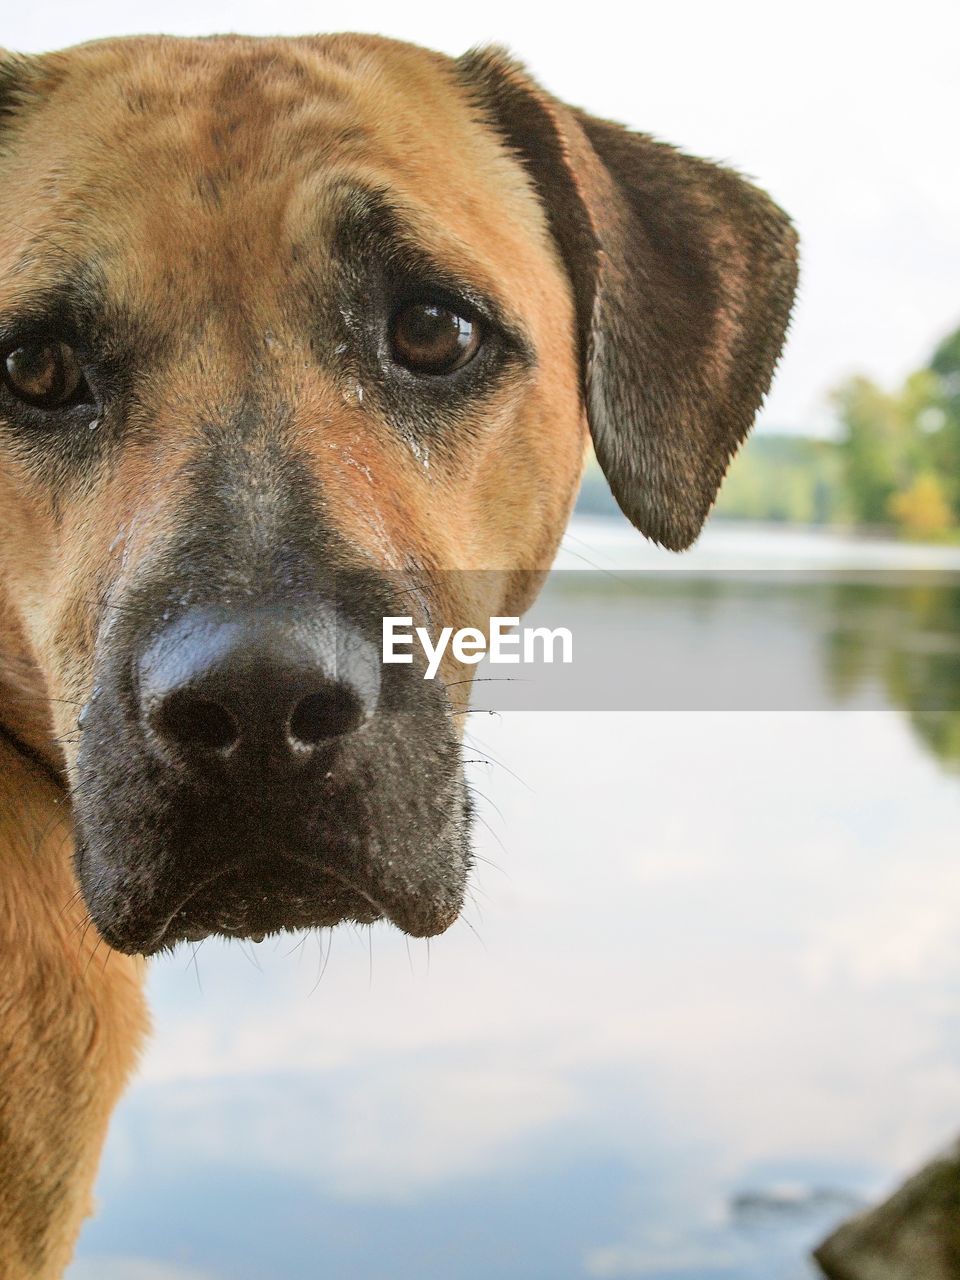 one animal, animal, animal themes, pet, mammal, dog, canine, domestic animals, portrait, animal body part, animal head, snout, looking at camera, close-up, no people, day, puppy, focus on foreground, black mouth cur, water, rhodesian ridgeback, carnivore, nature, outdoors